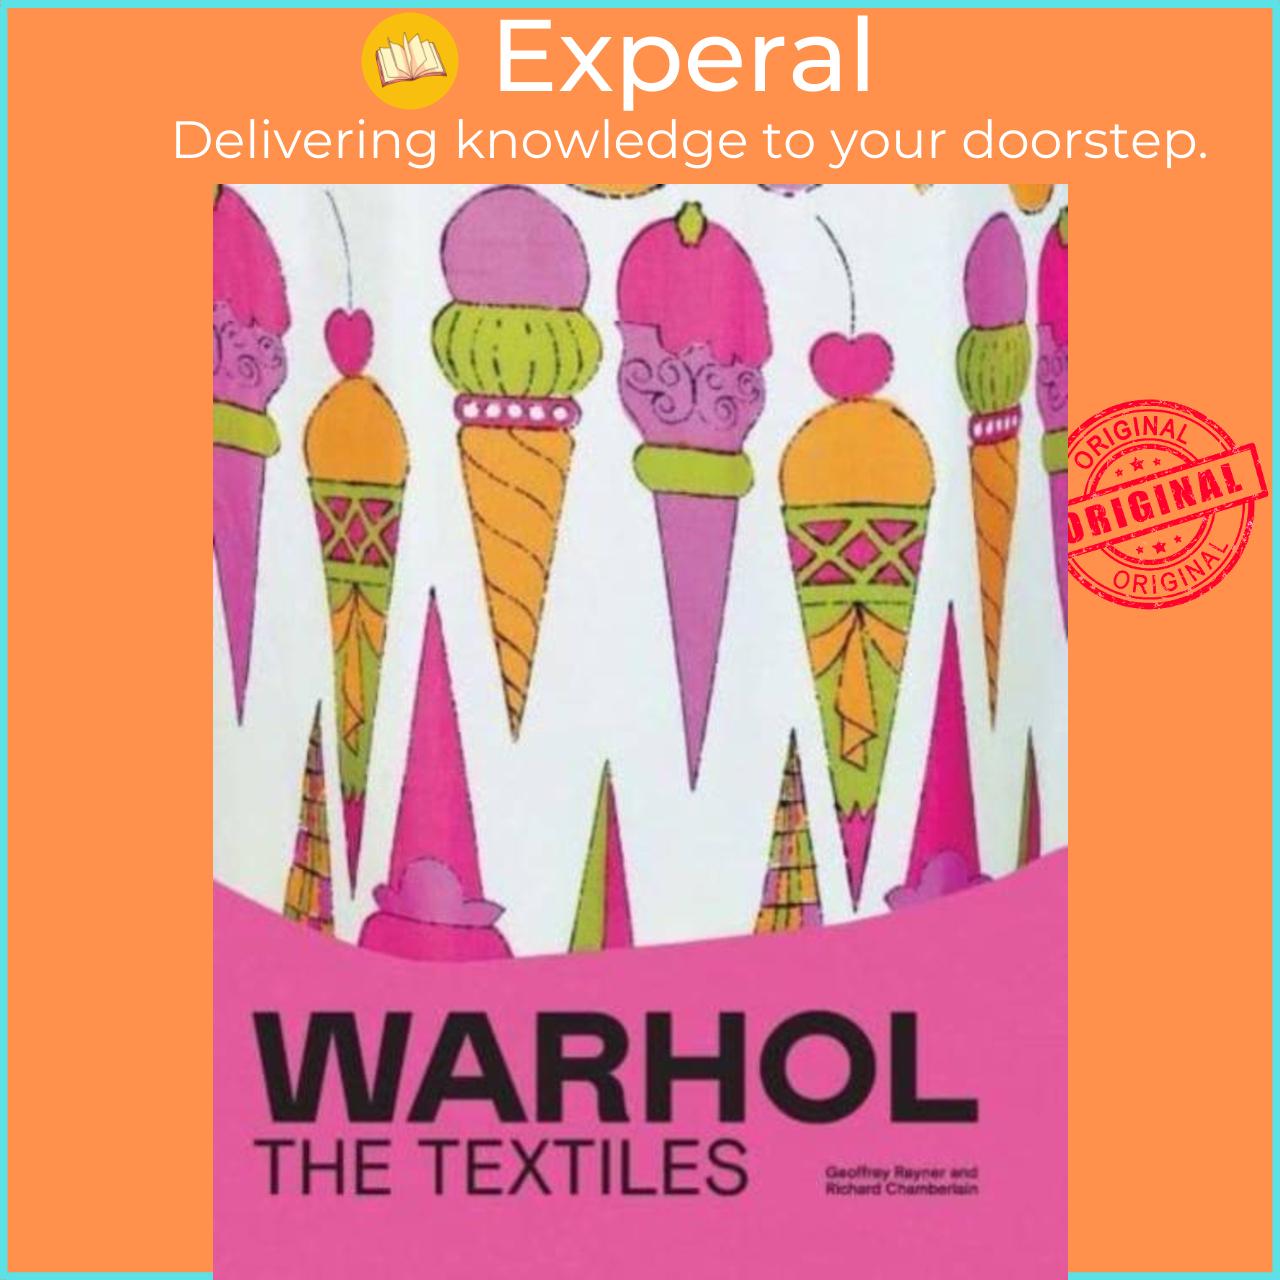 Sách - Warhol - The Textiles by Richard Chamberlain (UK edition, hardcover)